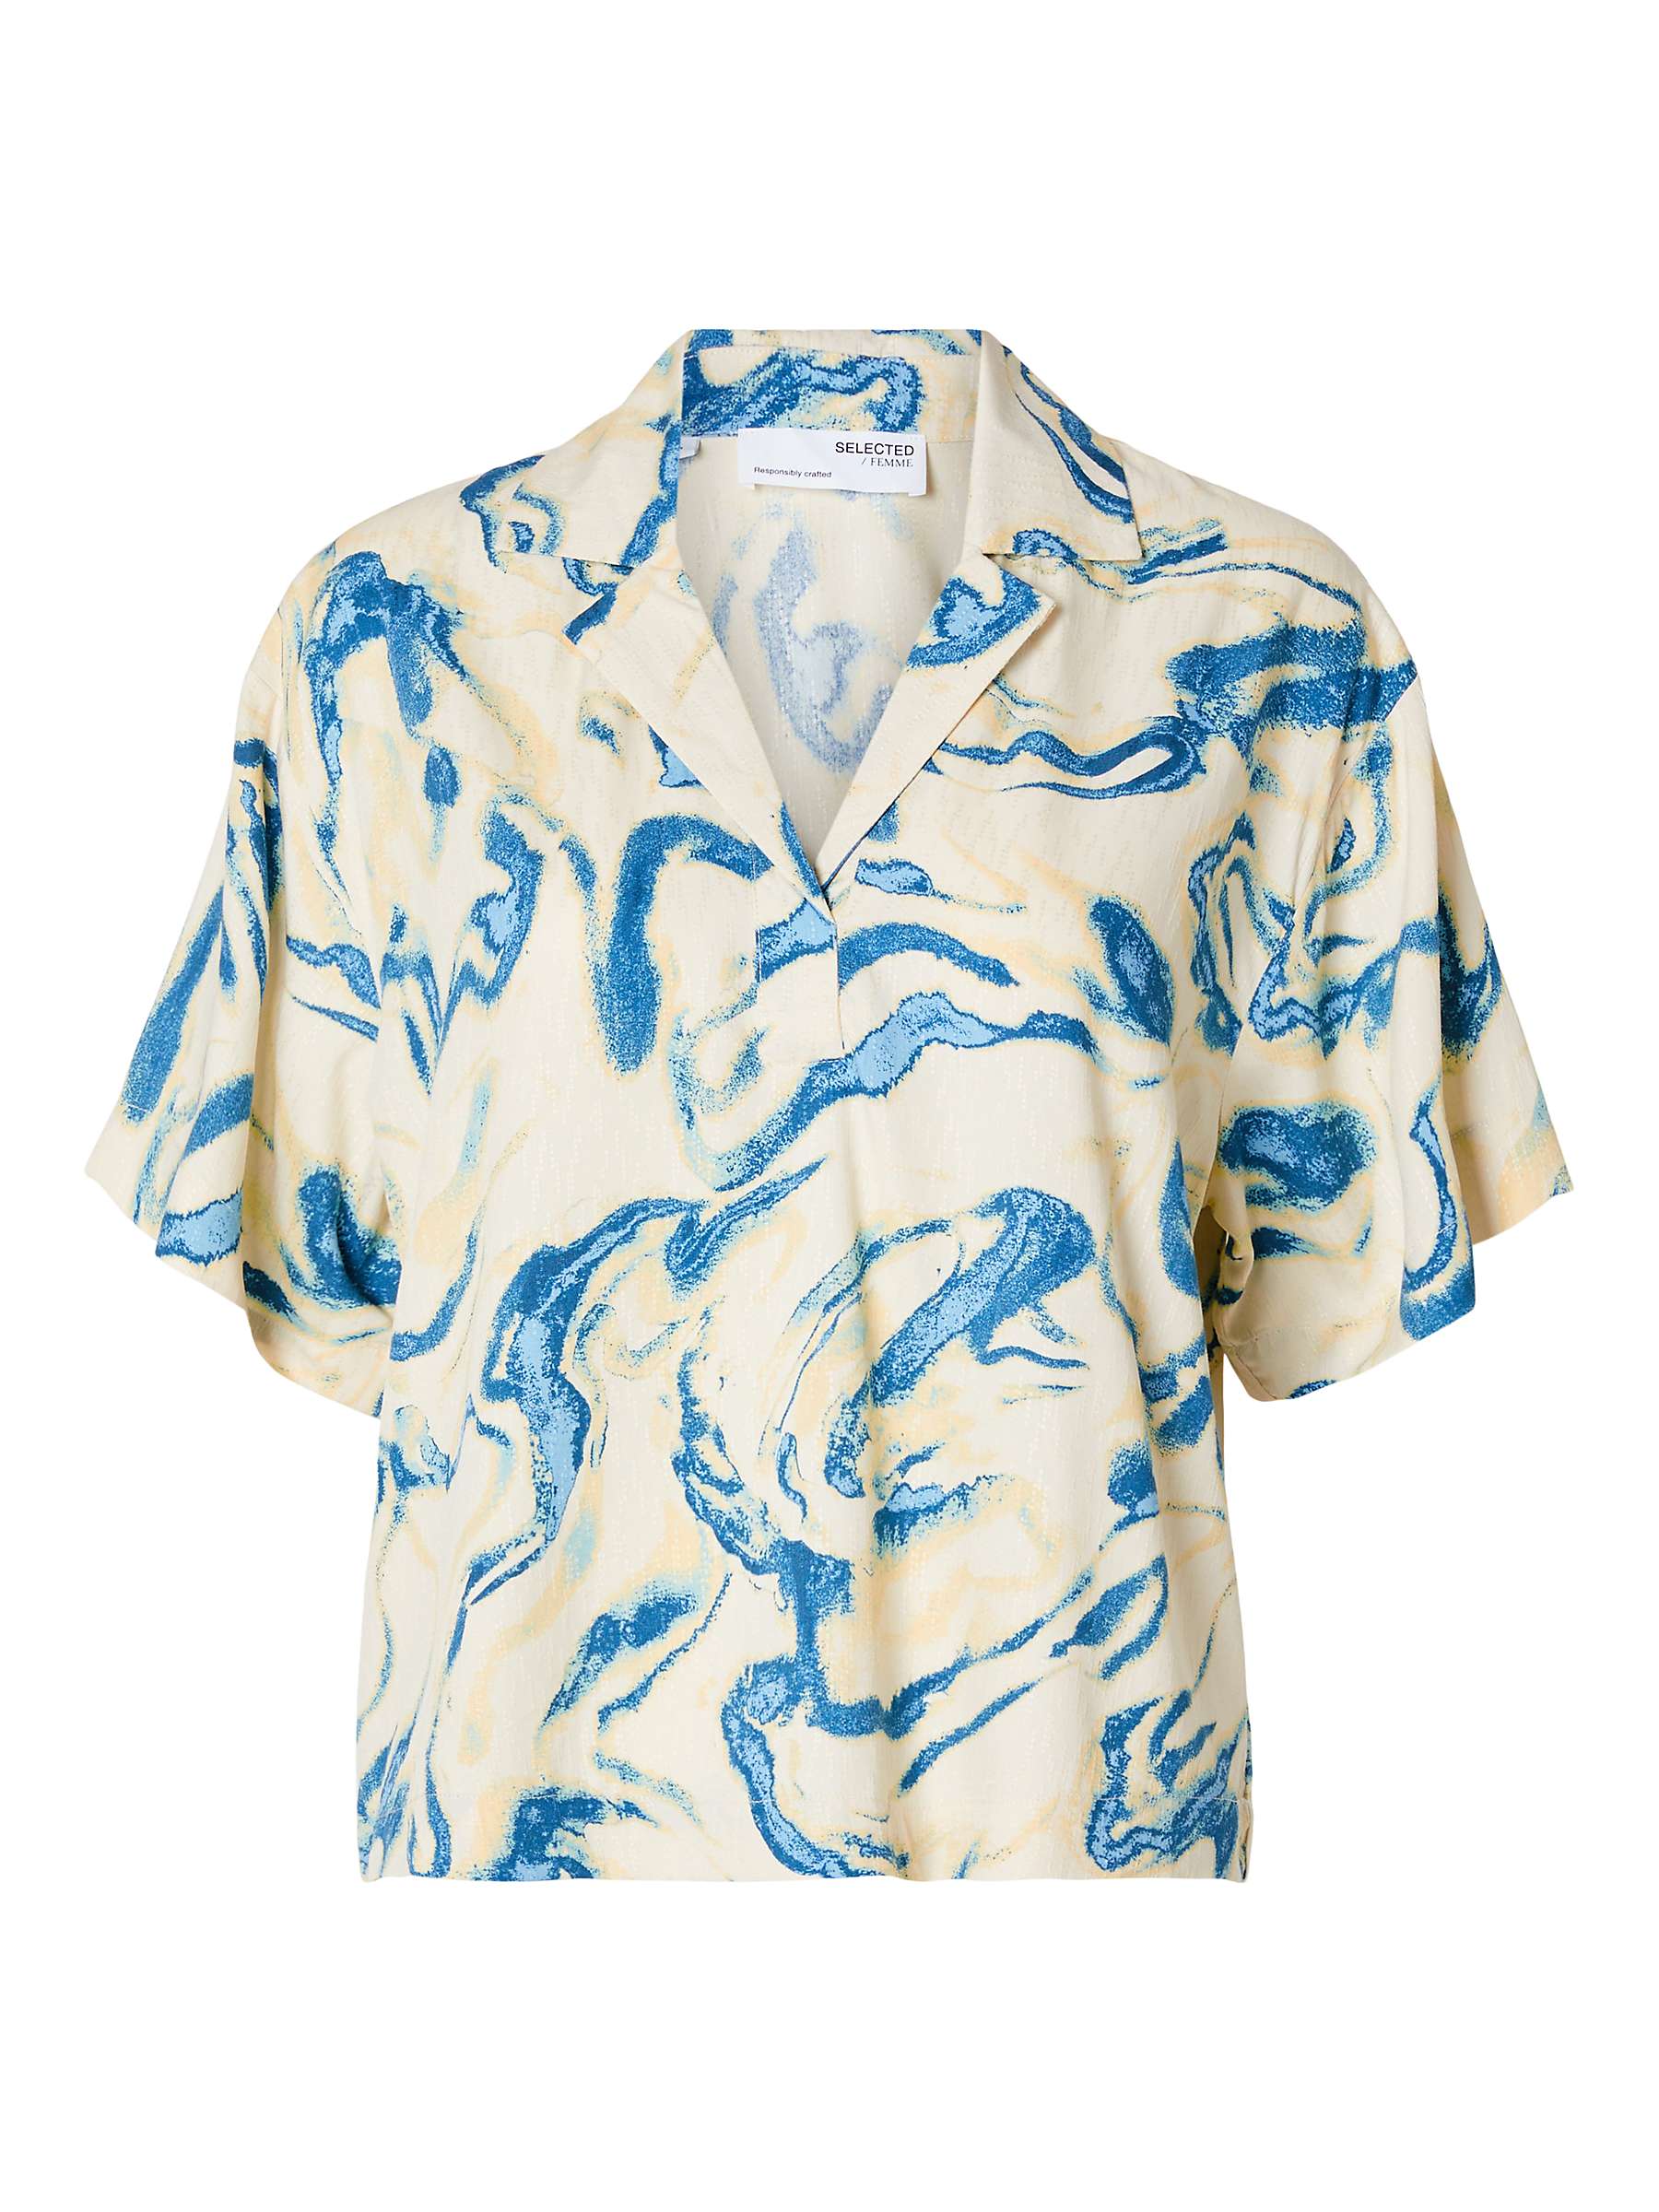 Buy SELECTED FEMME Fiorella Abstract Print Short Sleeve Blouse, Birch Online at johnlewis.com